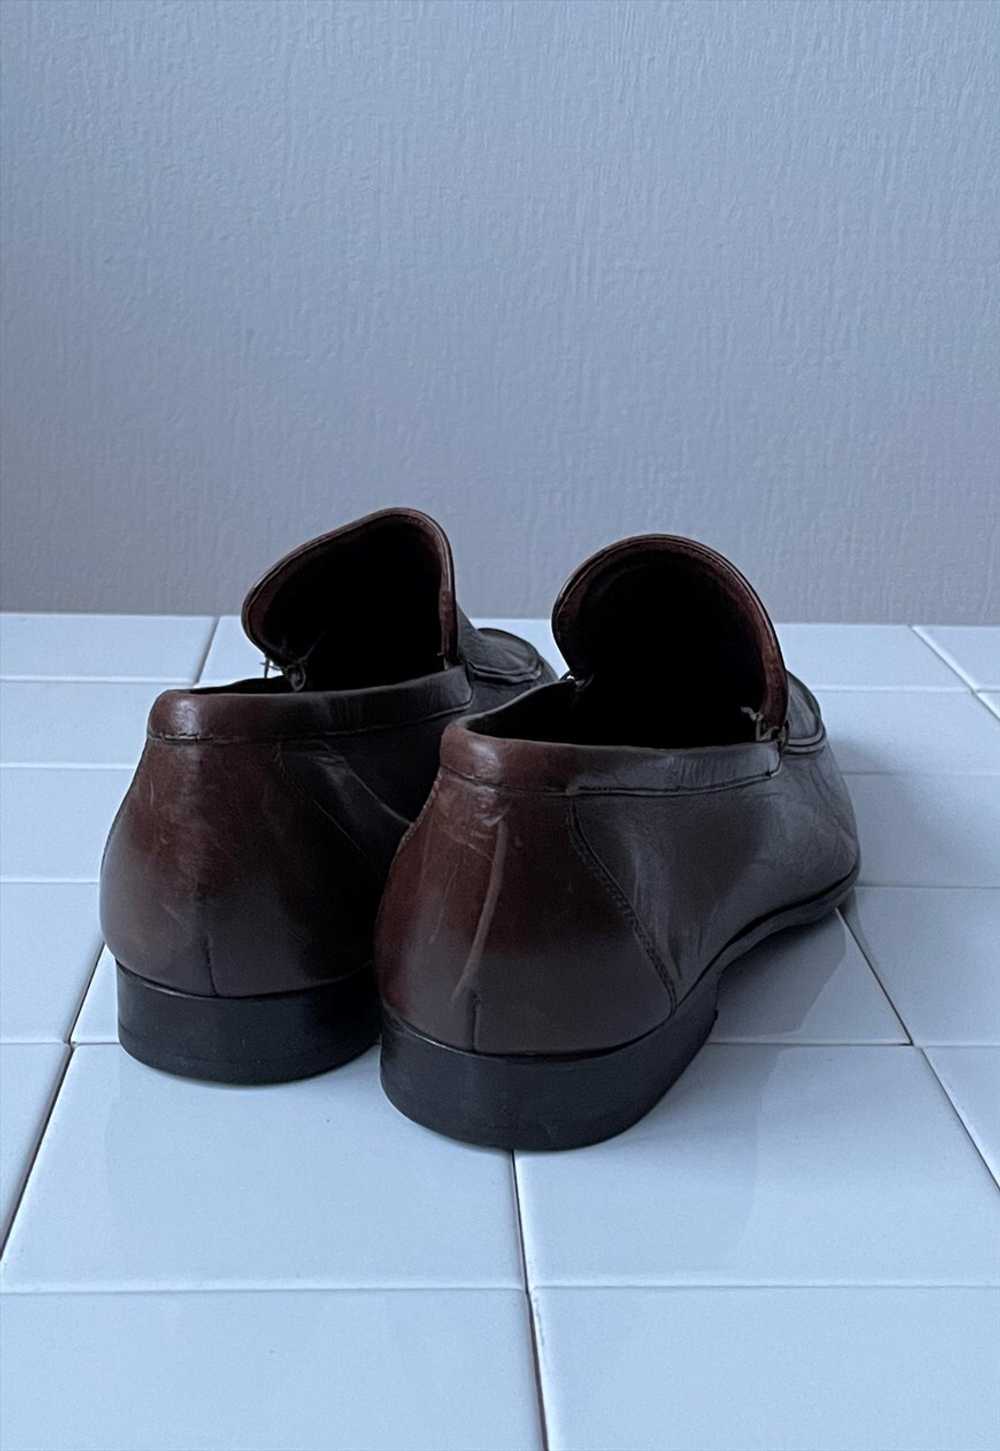 Vintage GUCCI Shoes Loafers Derby 90s Tom Ford Era - image 4